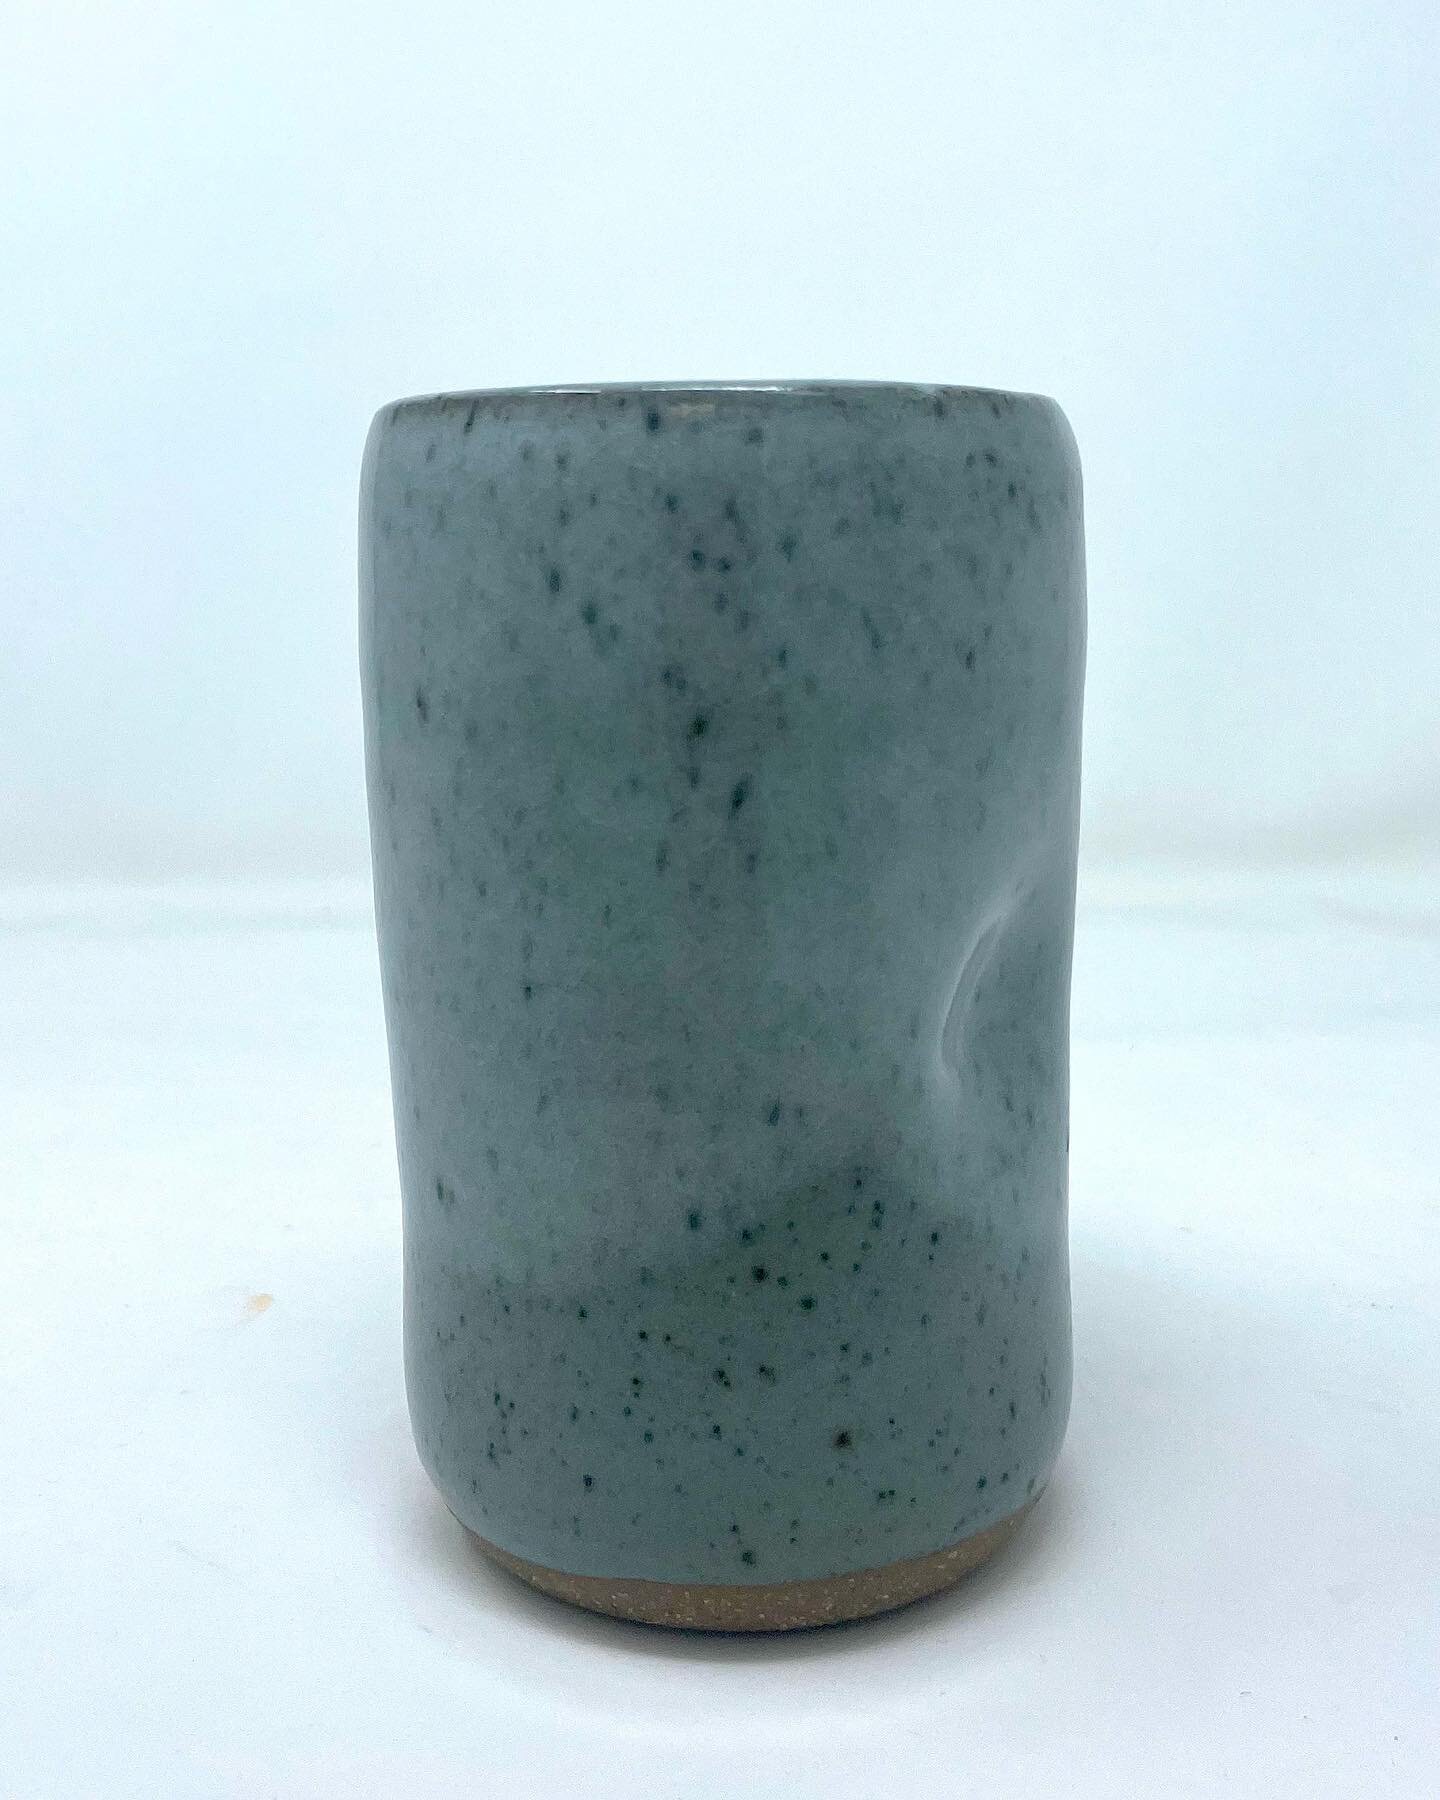 16oz tumbler, cone 10 reduction, on a buff clay body.
Made and sold
@claystreetstudiospdx